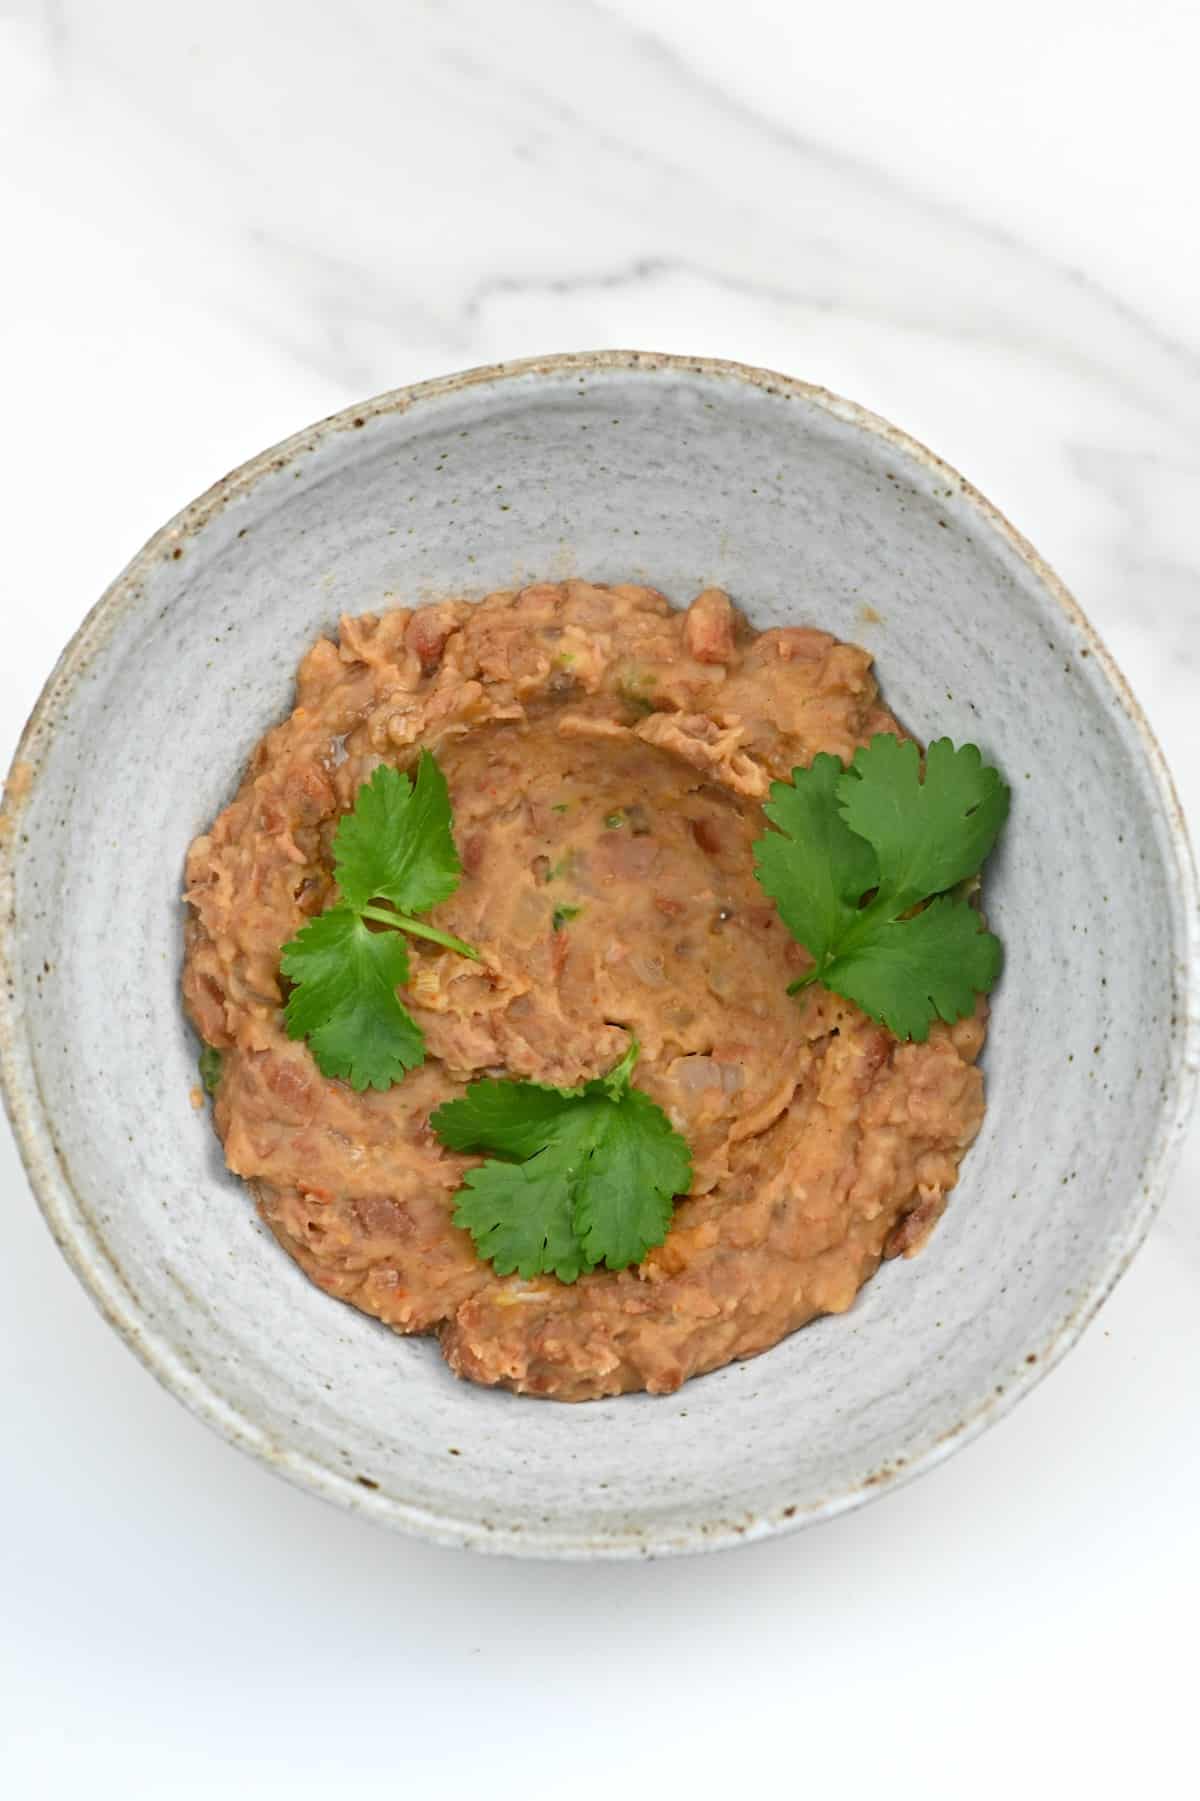 Vegan refried beans (frijoles refritos) in a bowl topped with parsley leaves